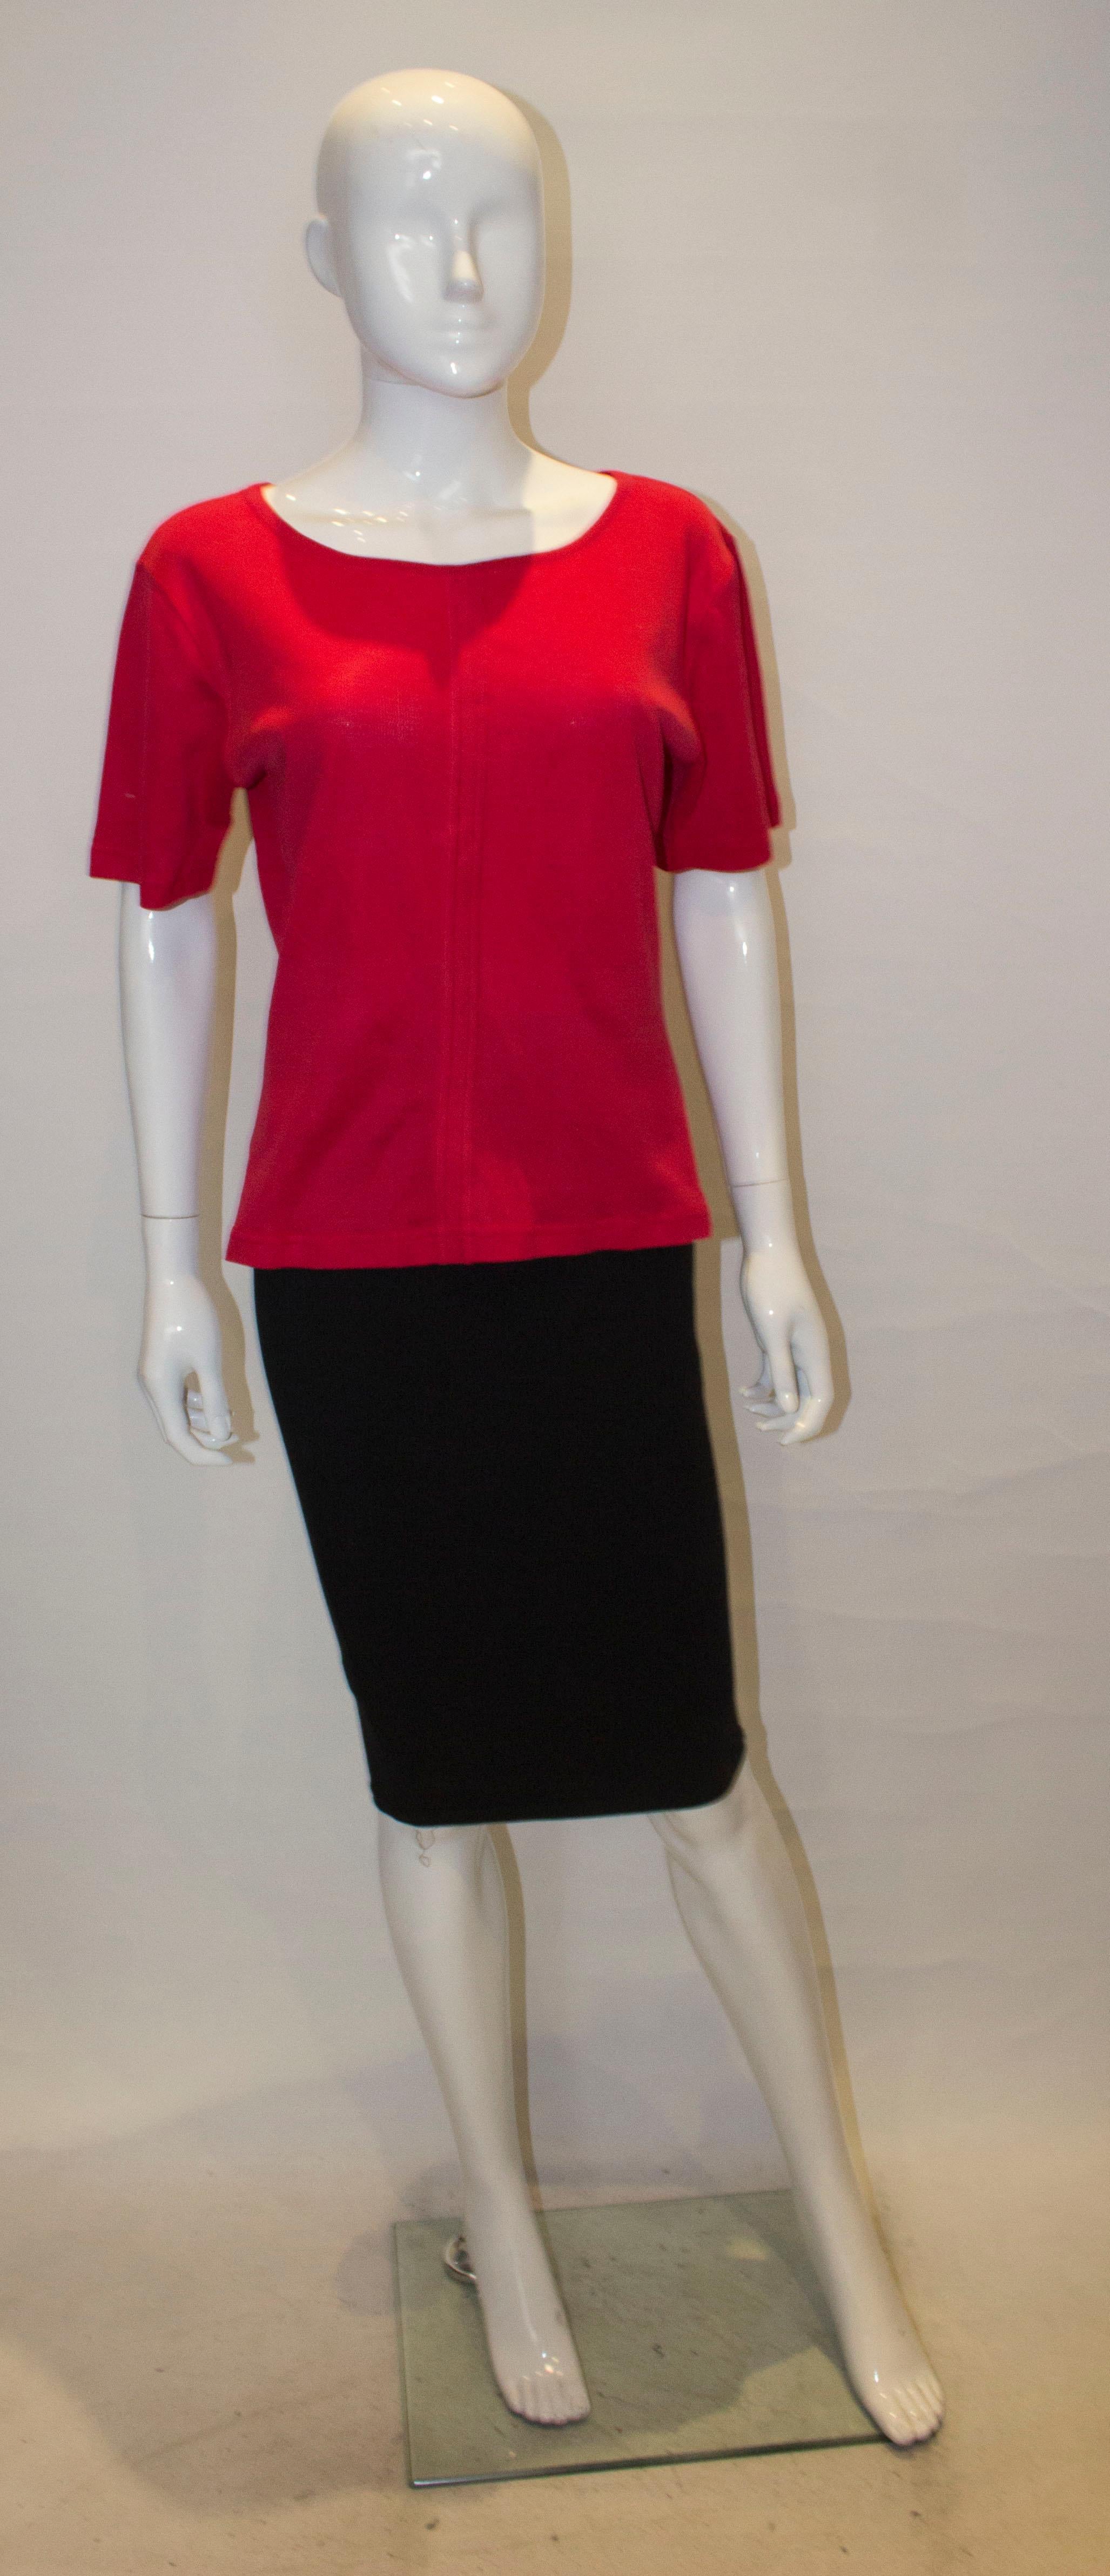 A chic abnd easy to wear vintage top by Yves Saint Laurent Rive Gauche line. The top has a round neckline and seam detail on the front.